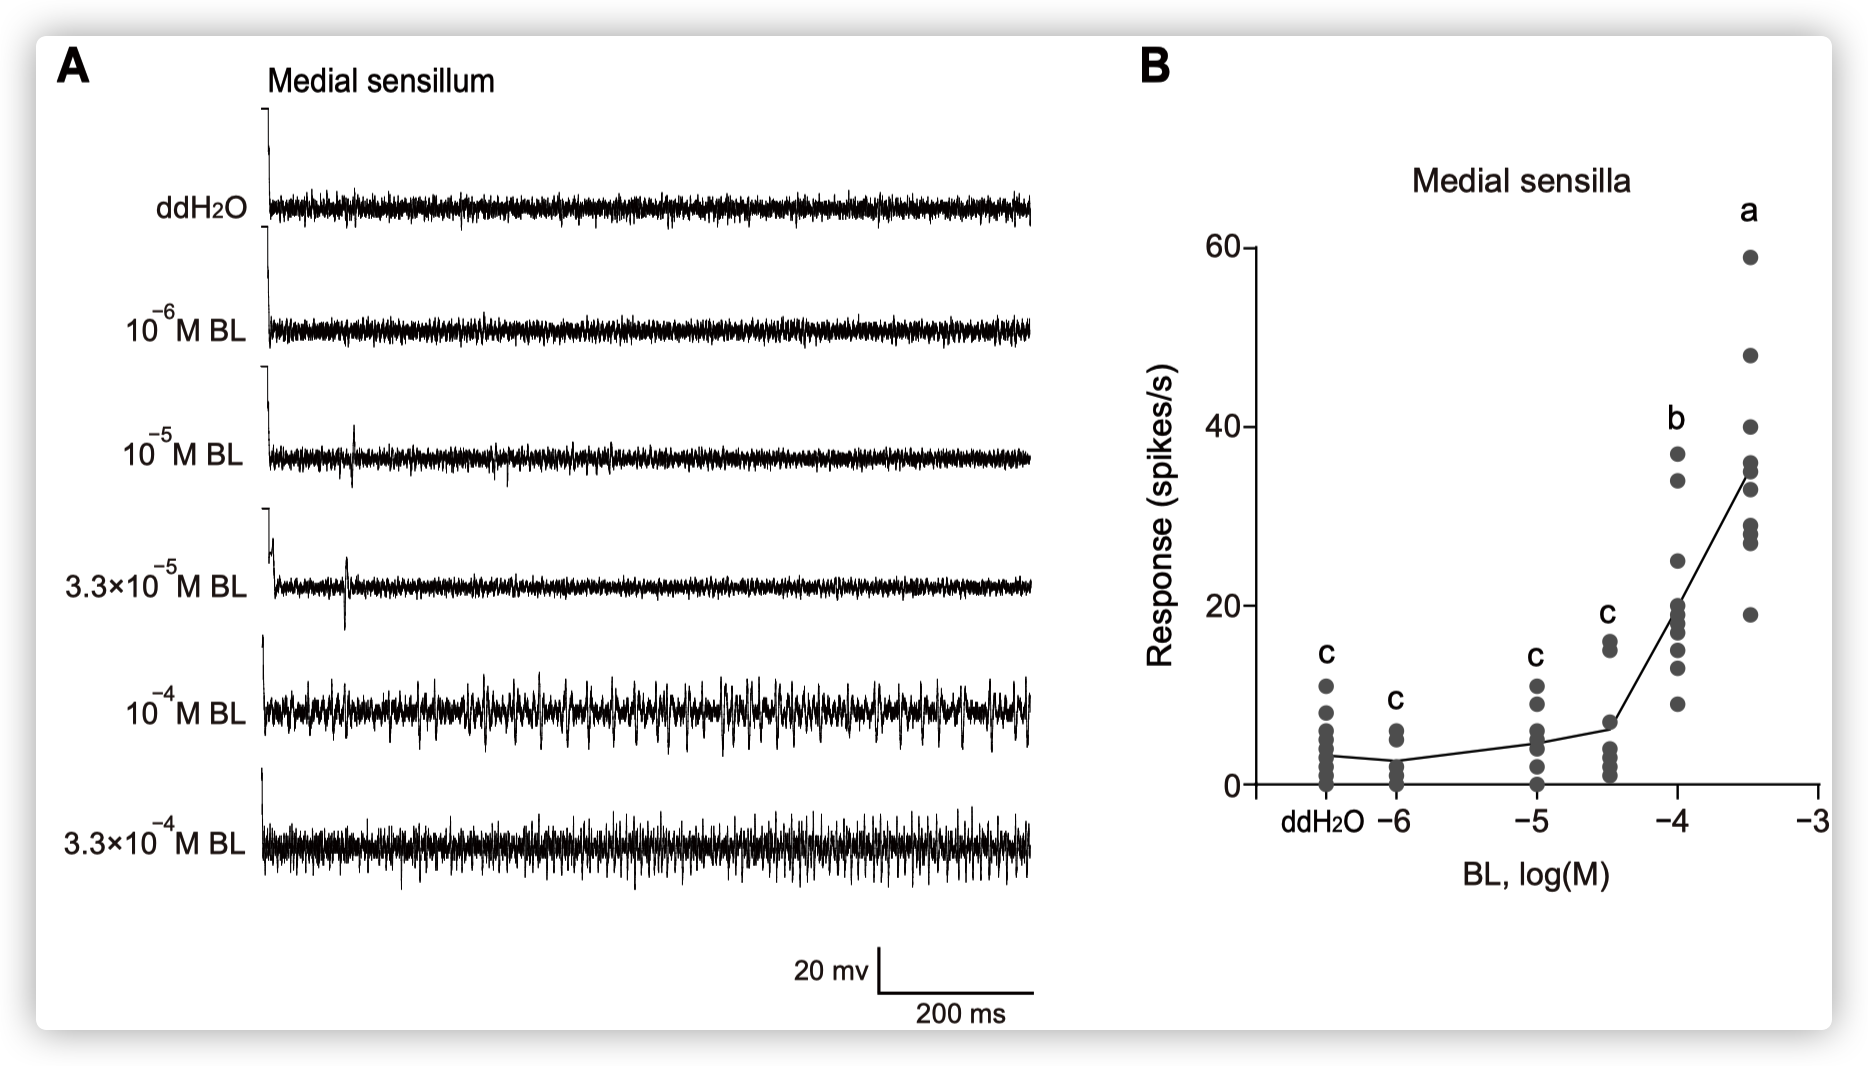 The medial sensilla styloconica showed a dose-dependent response to BL.